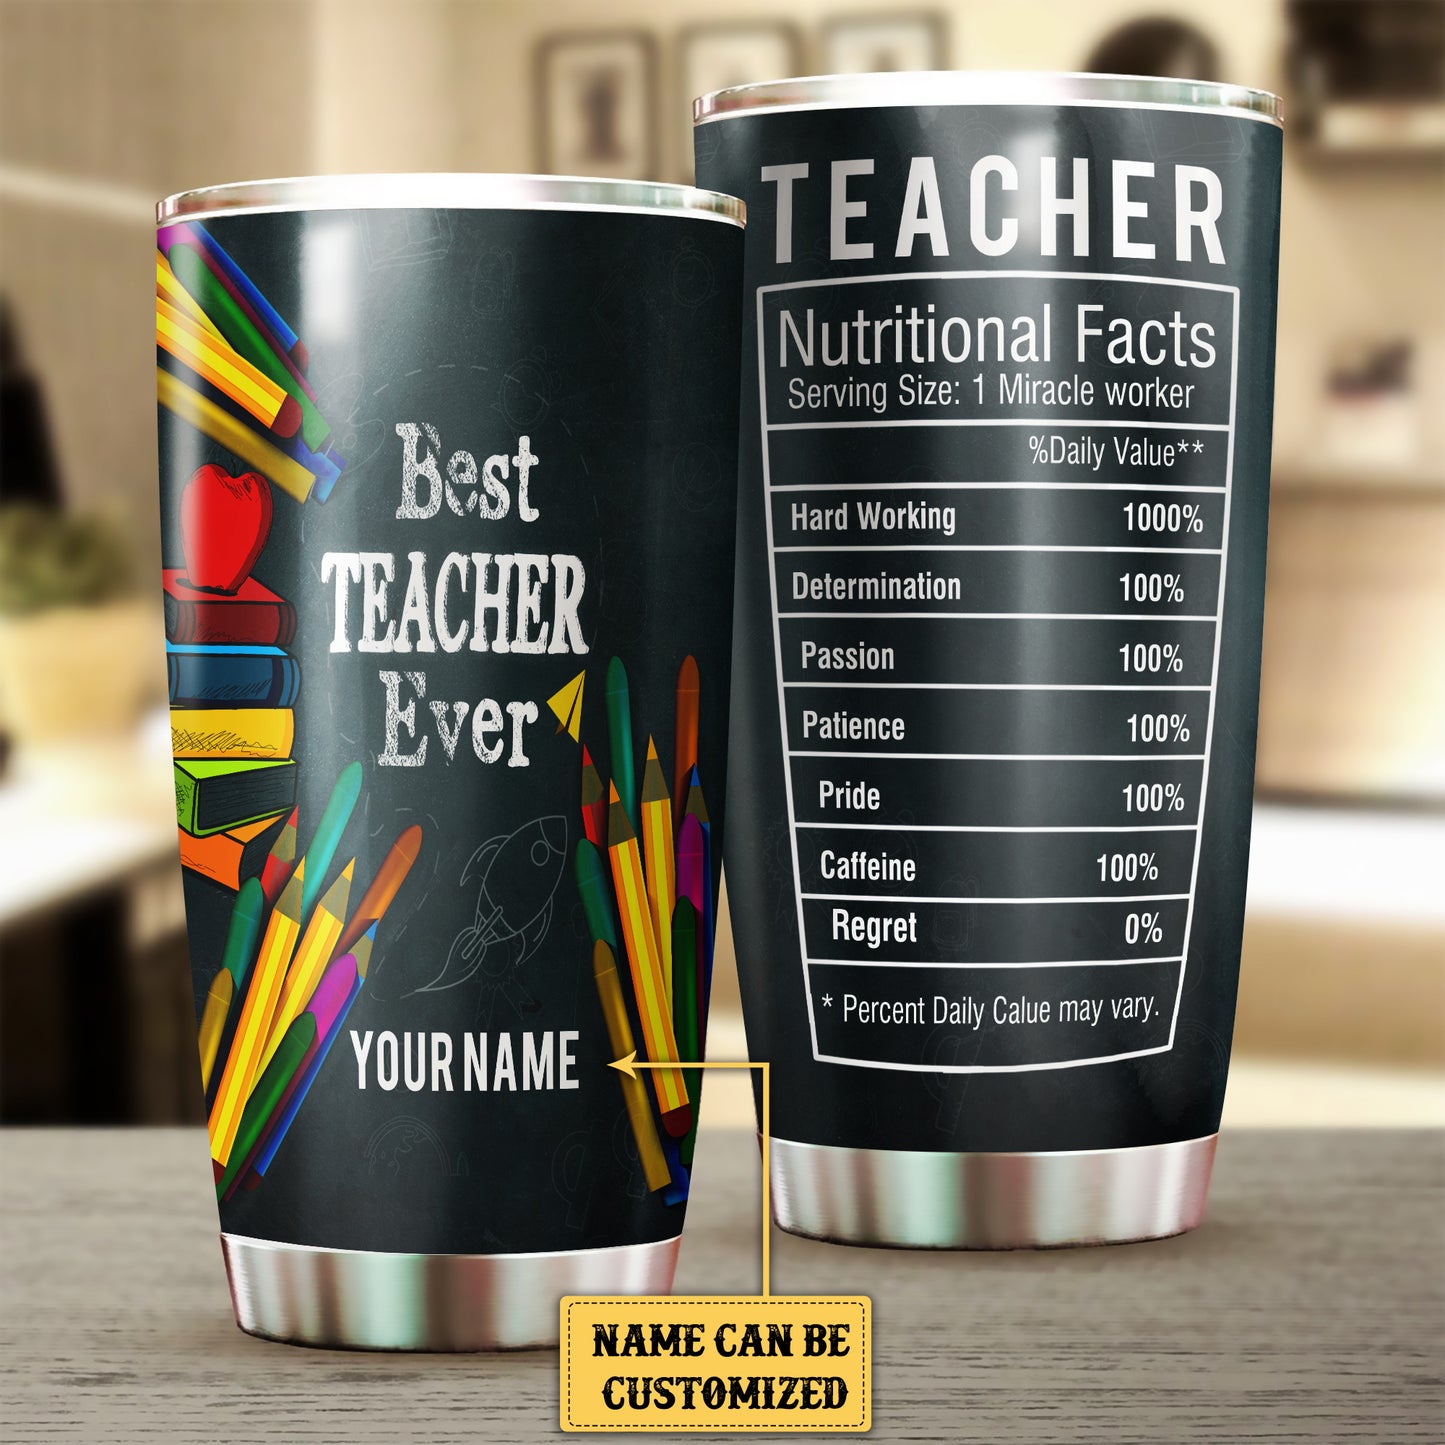 Personalized Best Teacher Ever Nutritional Facts Tumbler